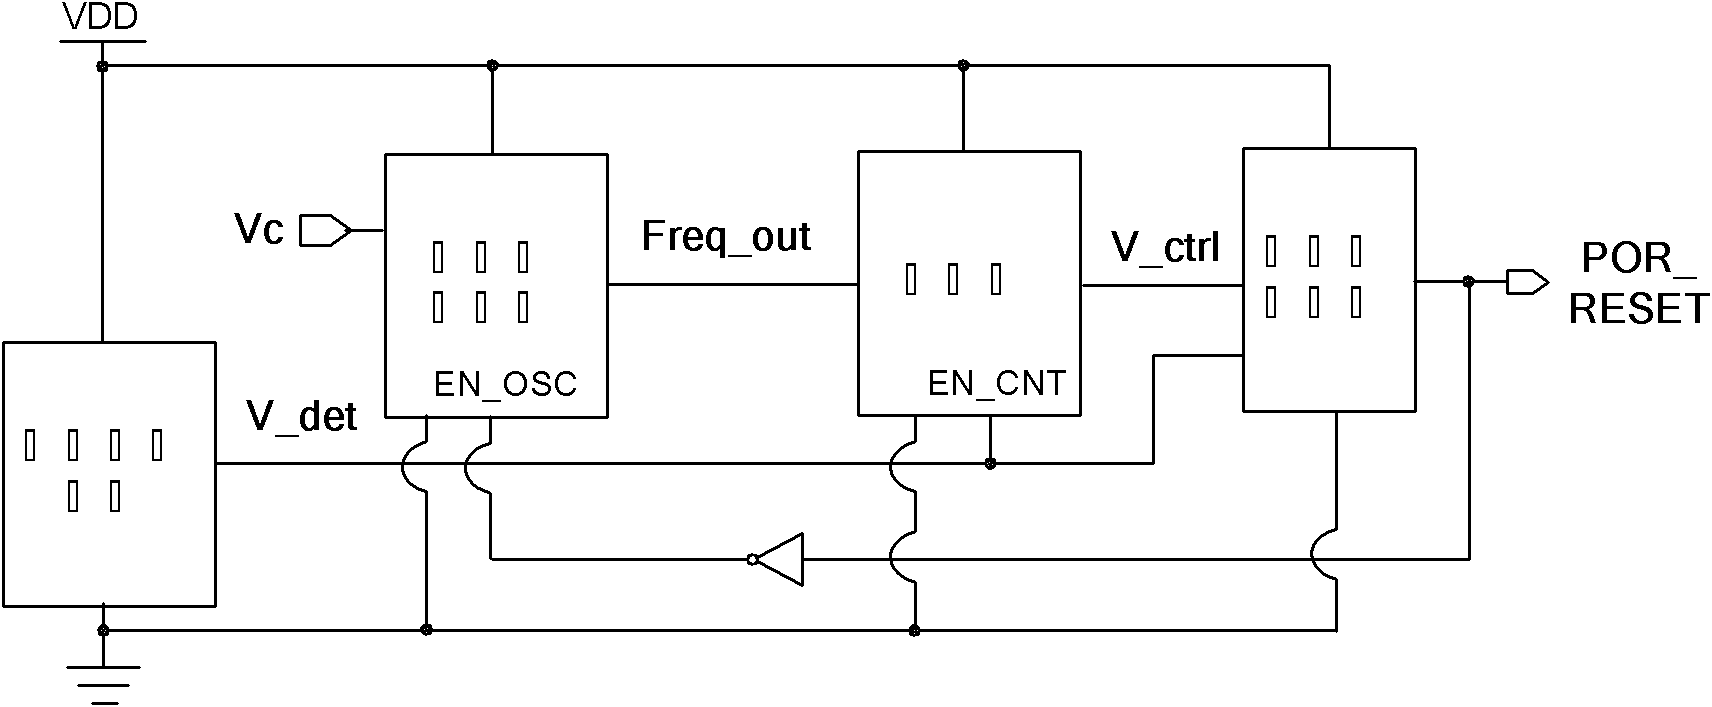 Low power-consumption time-delay controllable POR (power on reset) method and circuit